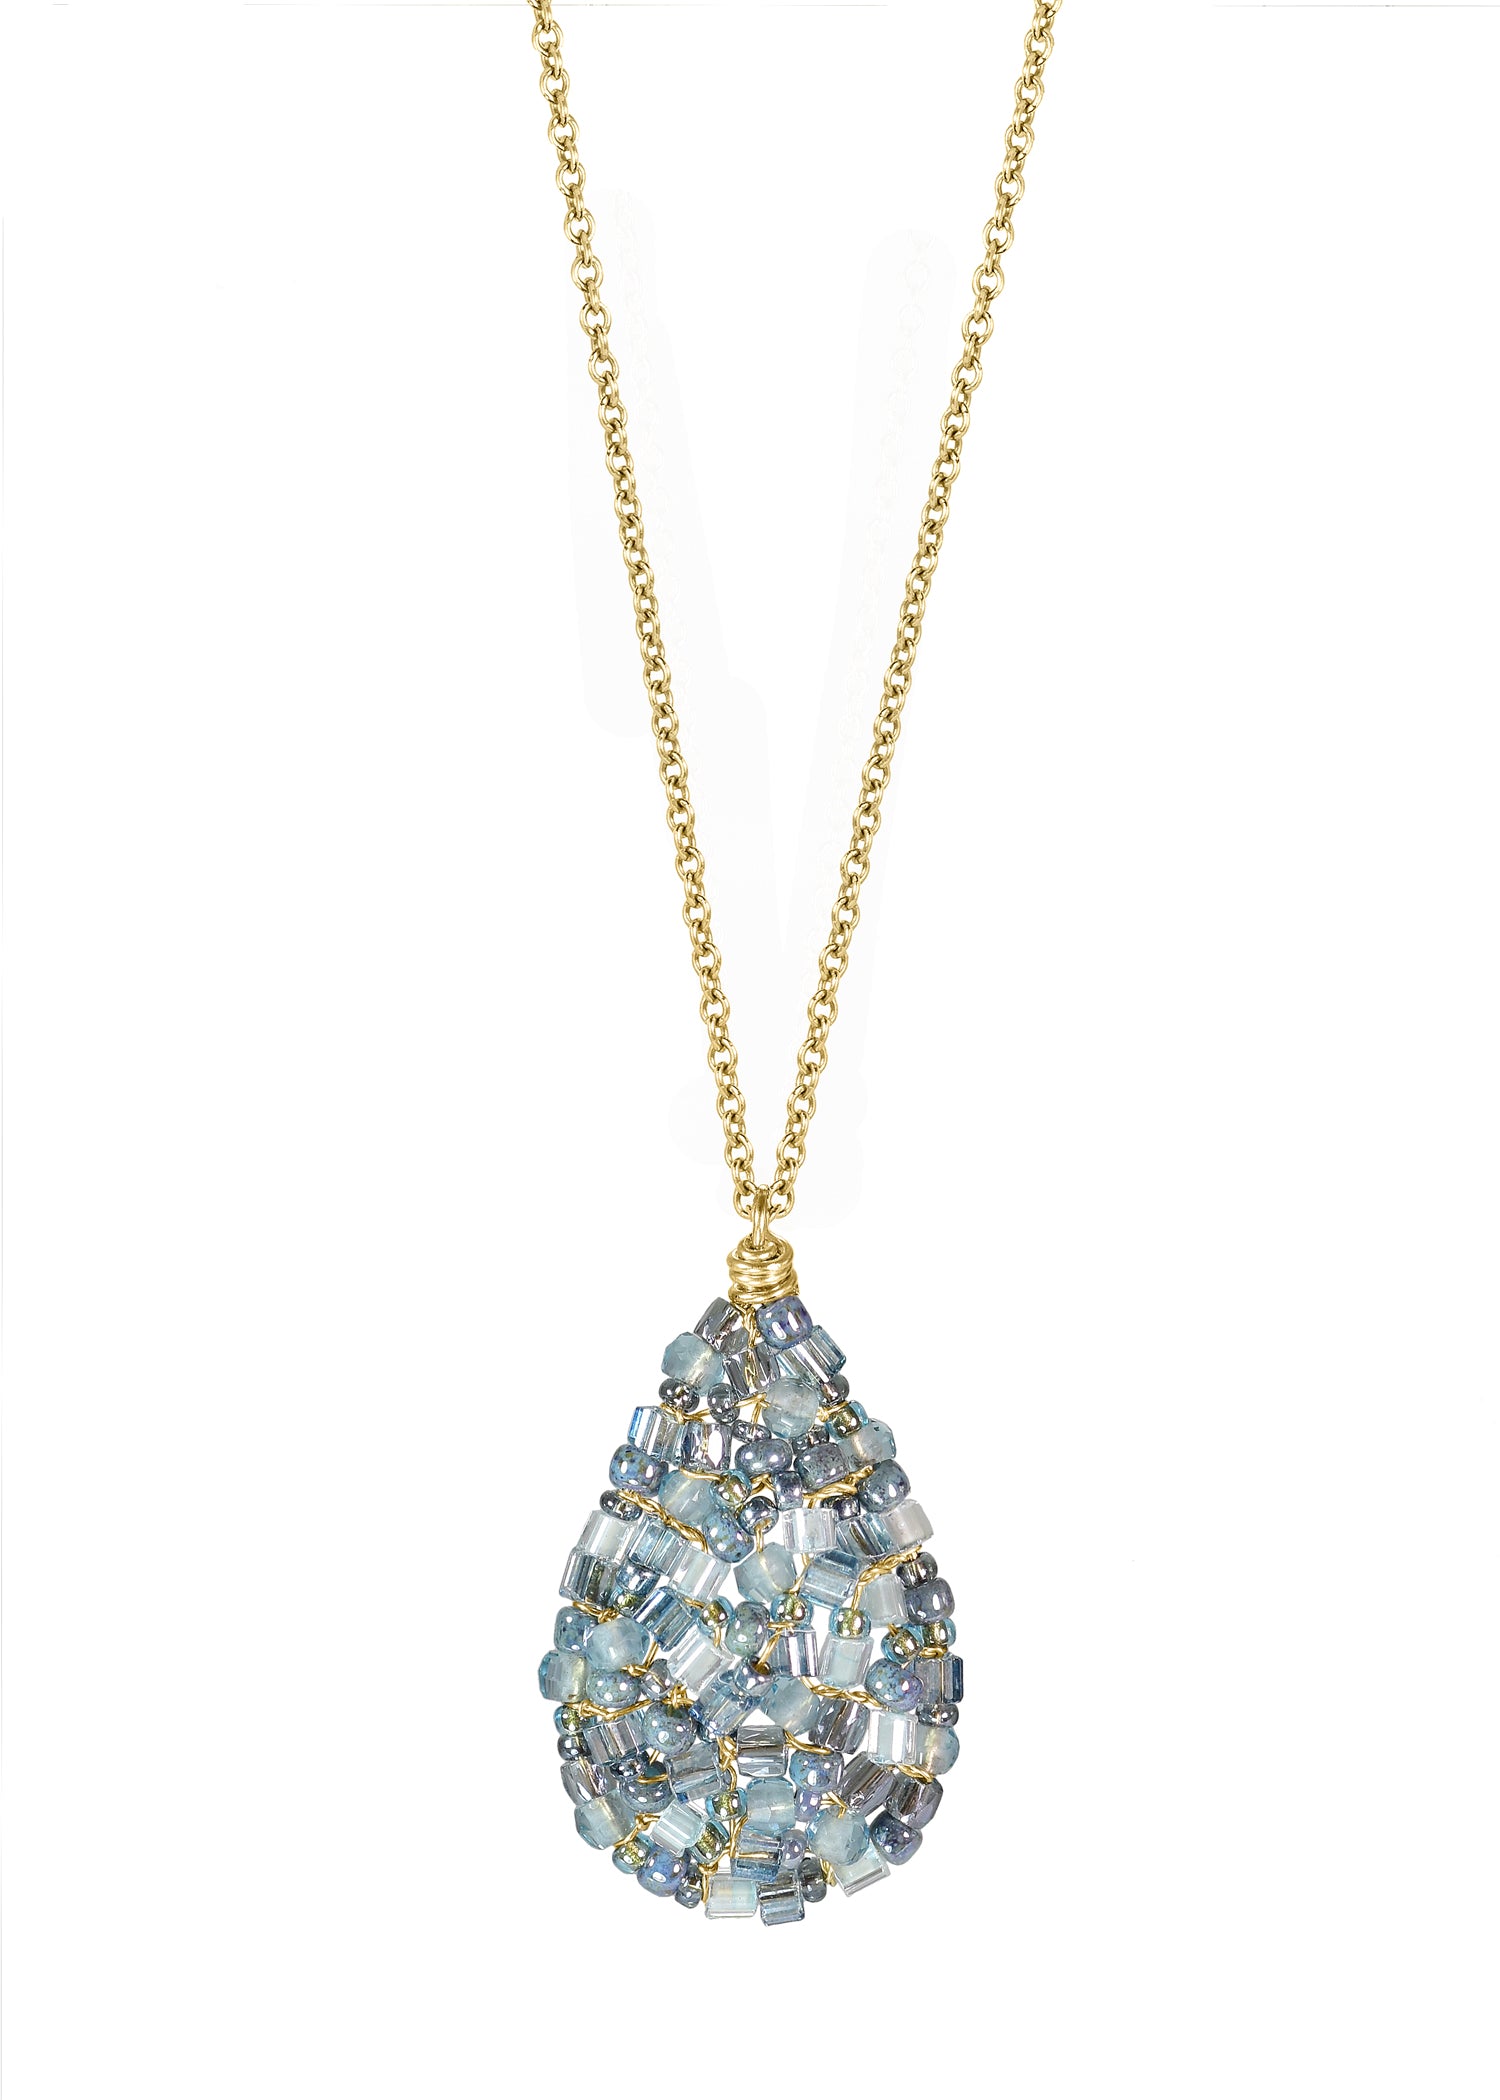 Aqua quartz Seed beads 14k gold fill Necklace measures 16" in length Pendant measures 1" in length and 5/8" in width at the widest point Handmade in our Los Angeles studio